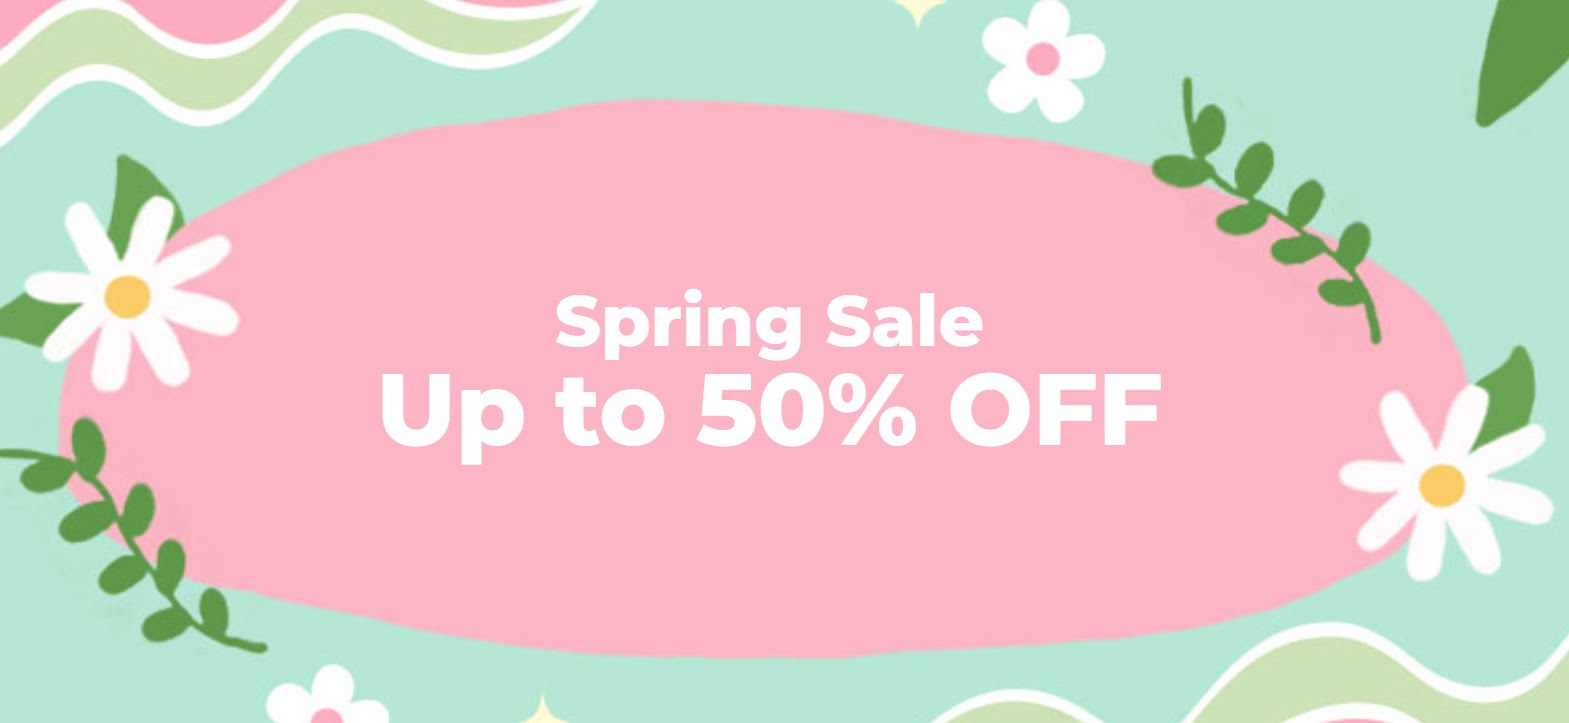 Up to 50% off sale at Yesstyle